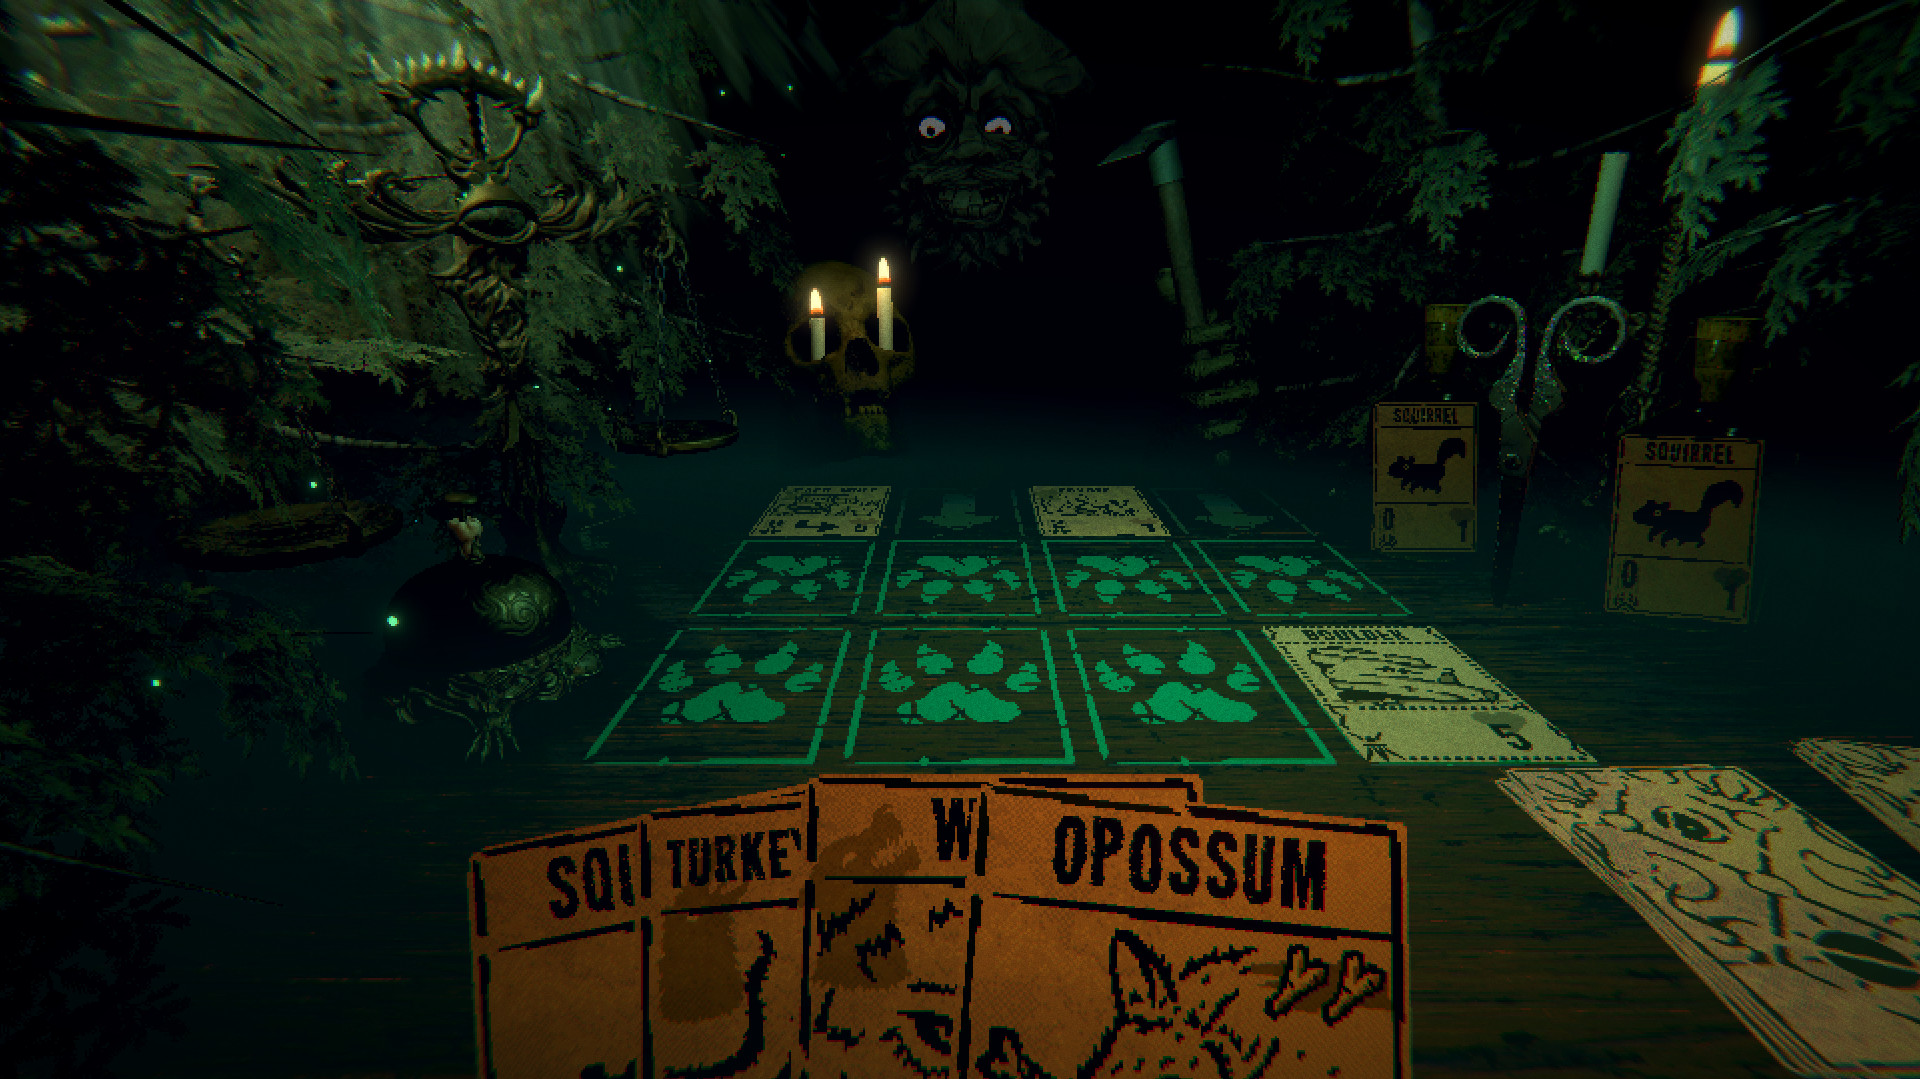 Best indie games: Inscryption. Image shows a player sitting across from a spooky figure cloaked in darkness, playing a card game.